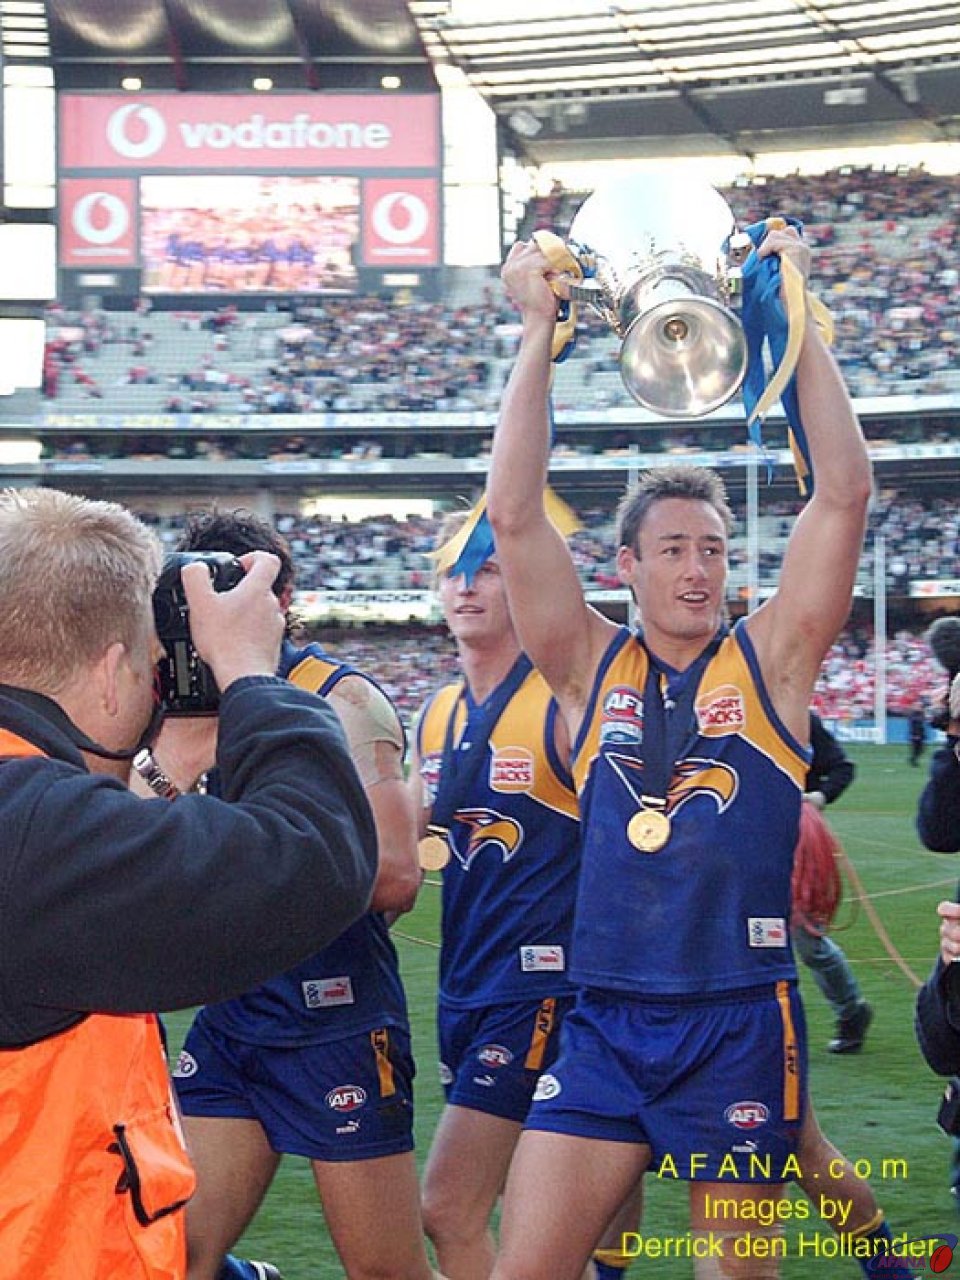 [b]The Eagles run their victory lap around the MCG after the 2006 AFL Grand Final[/b]